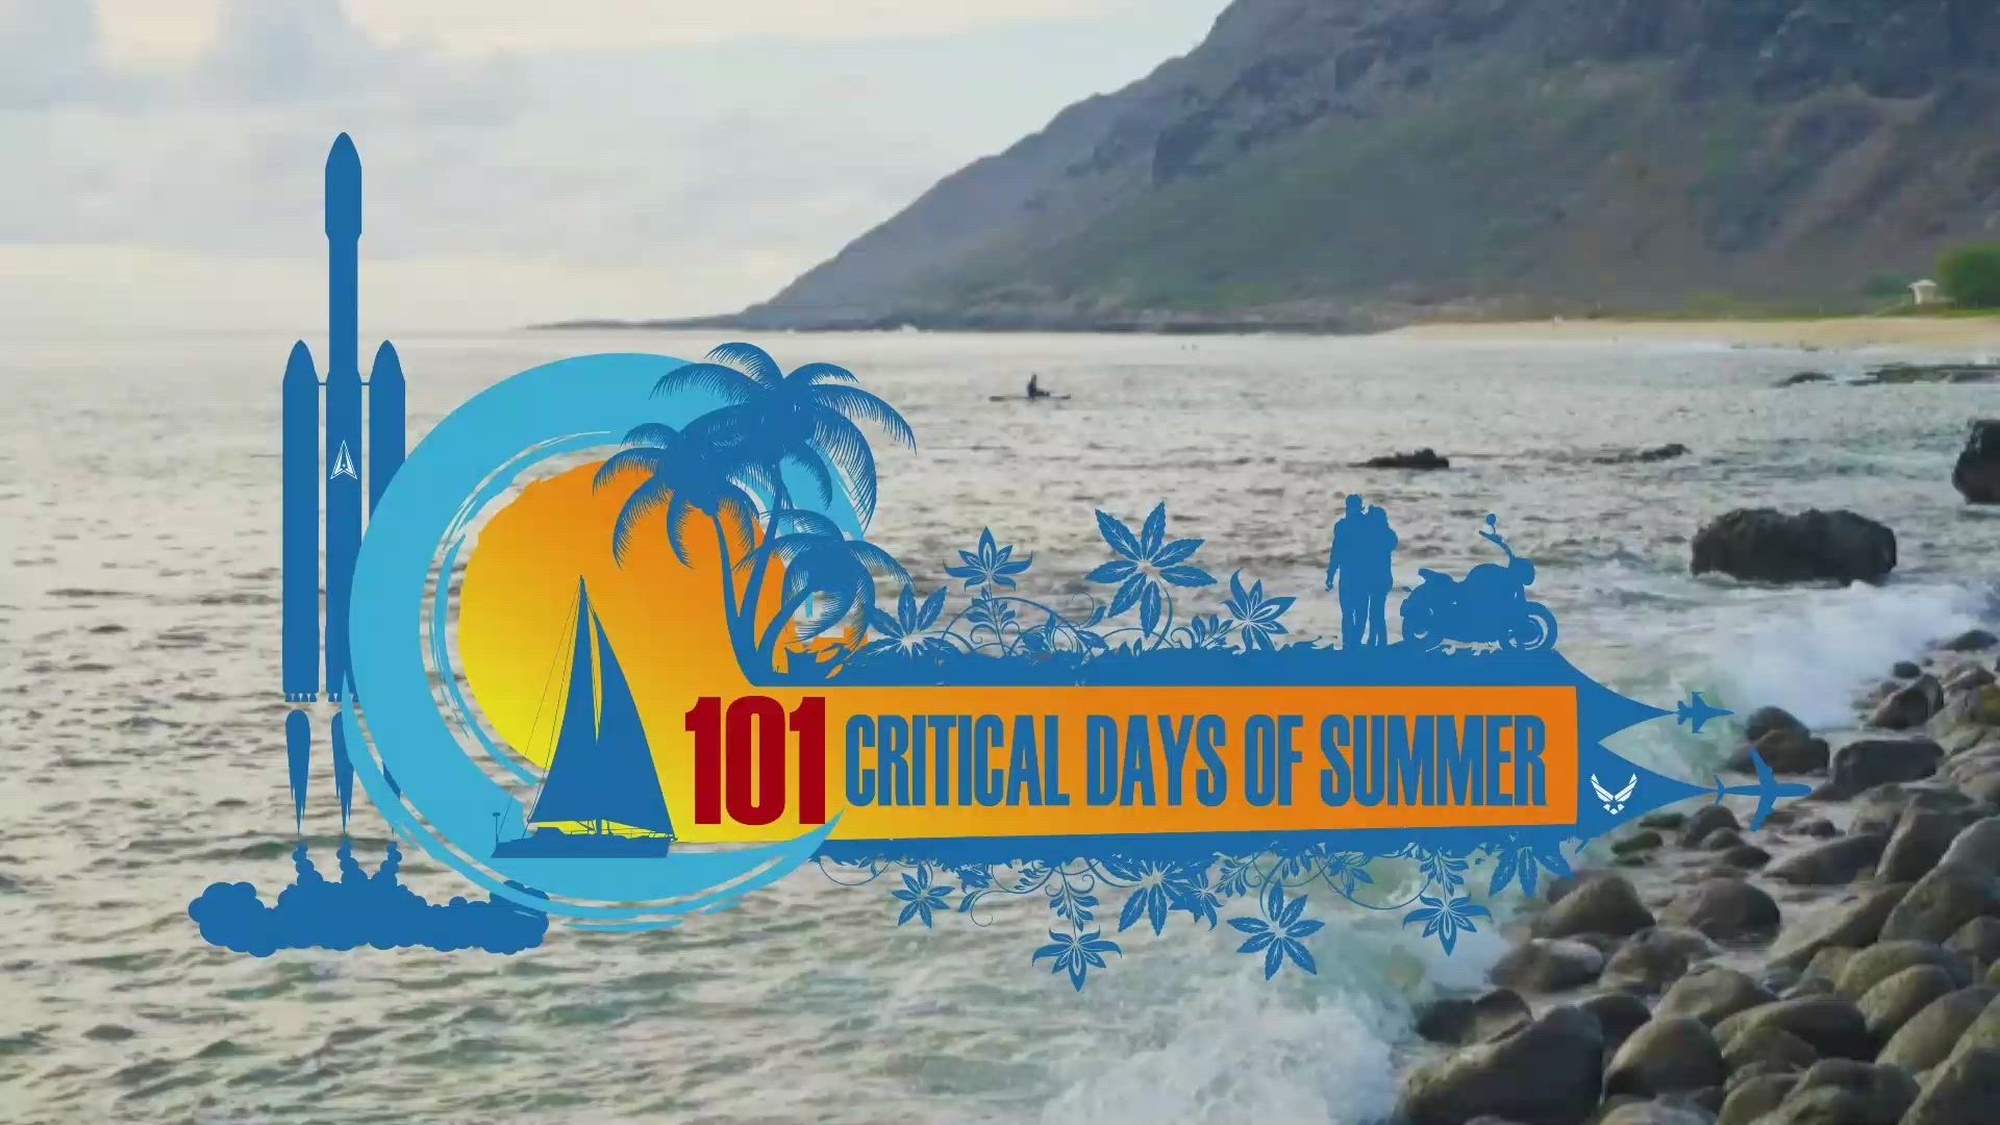 Critical Dys of Summer video